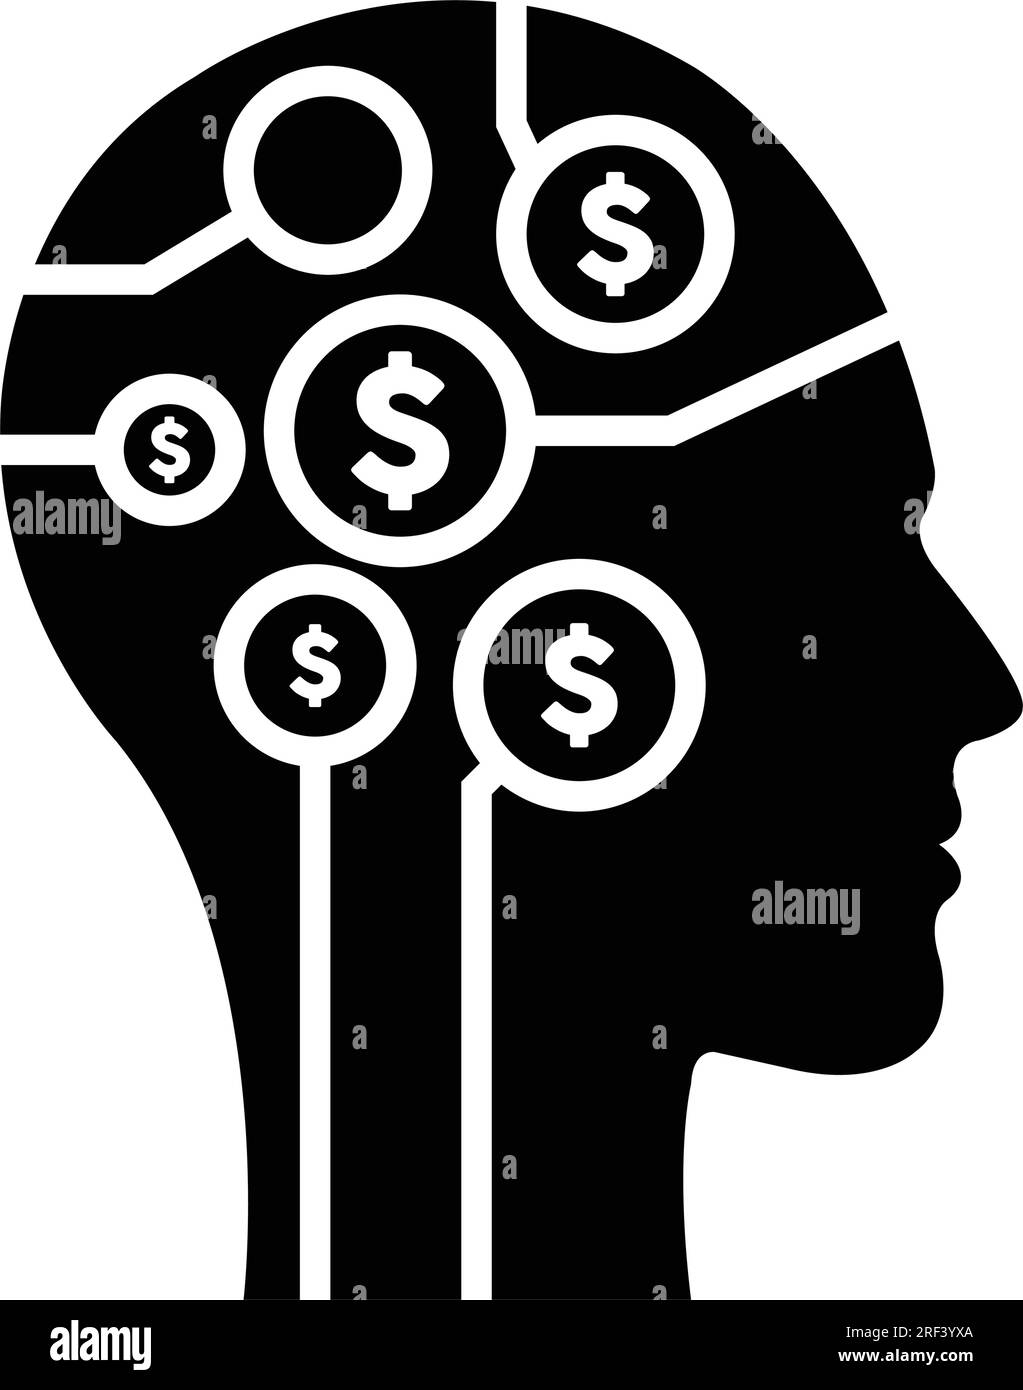 Digital dollar sign symbol on futuristic human profile with brain chip implant for AI Artificial Intelligence money mind illustration. Stock Vector